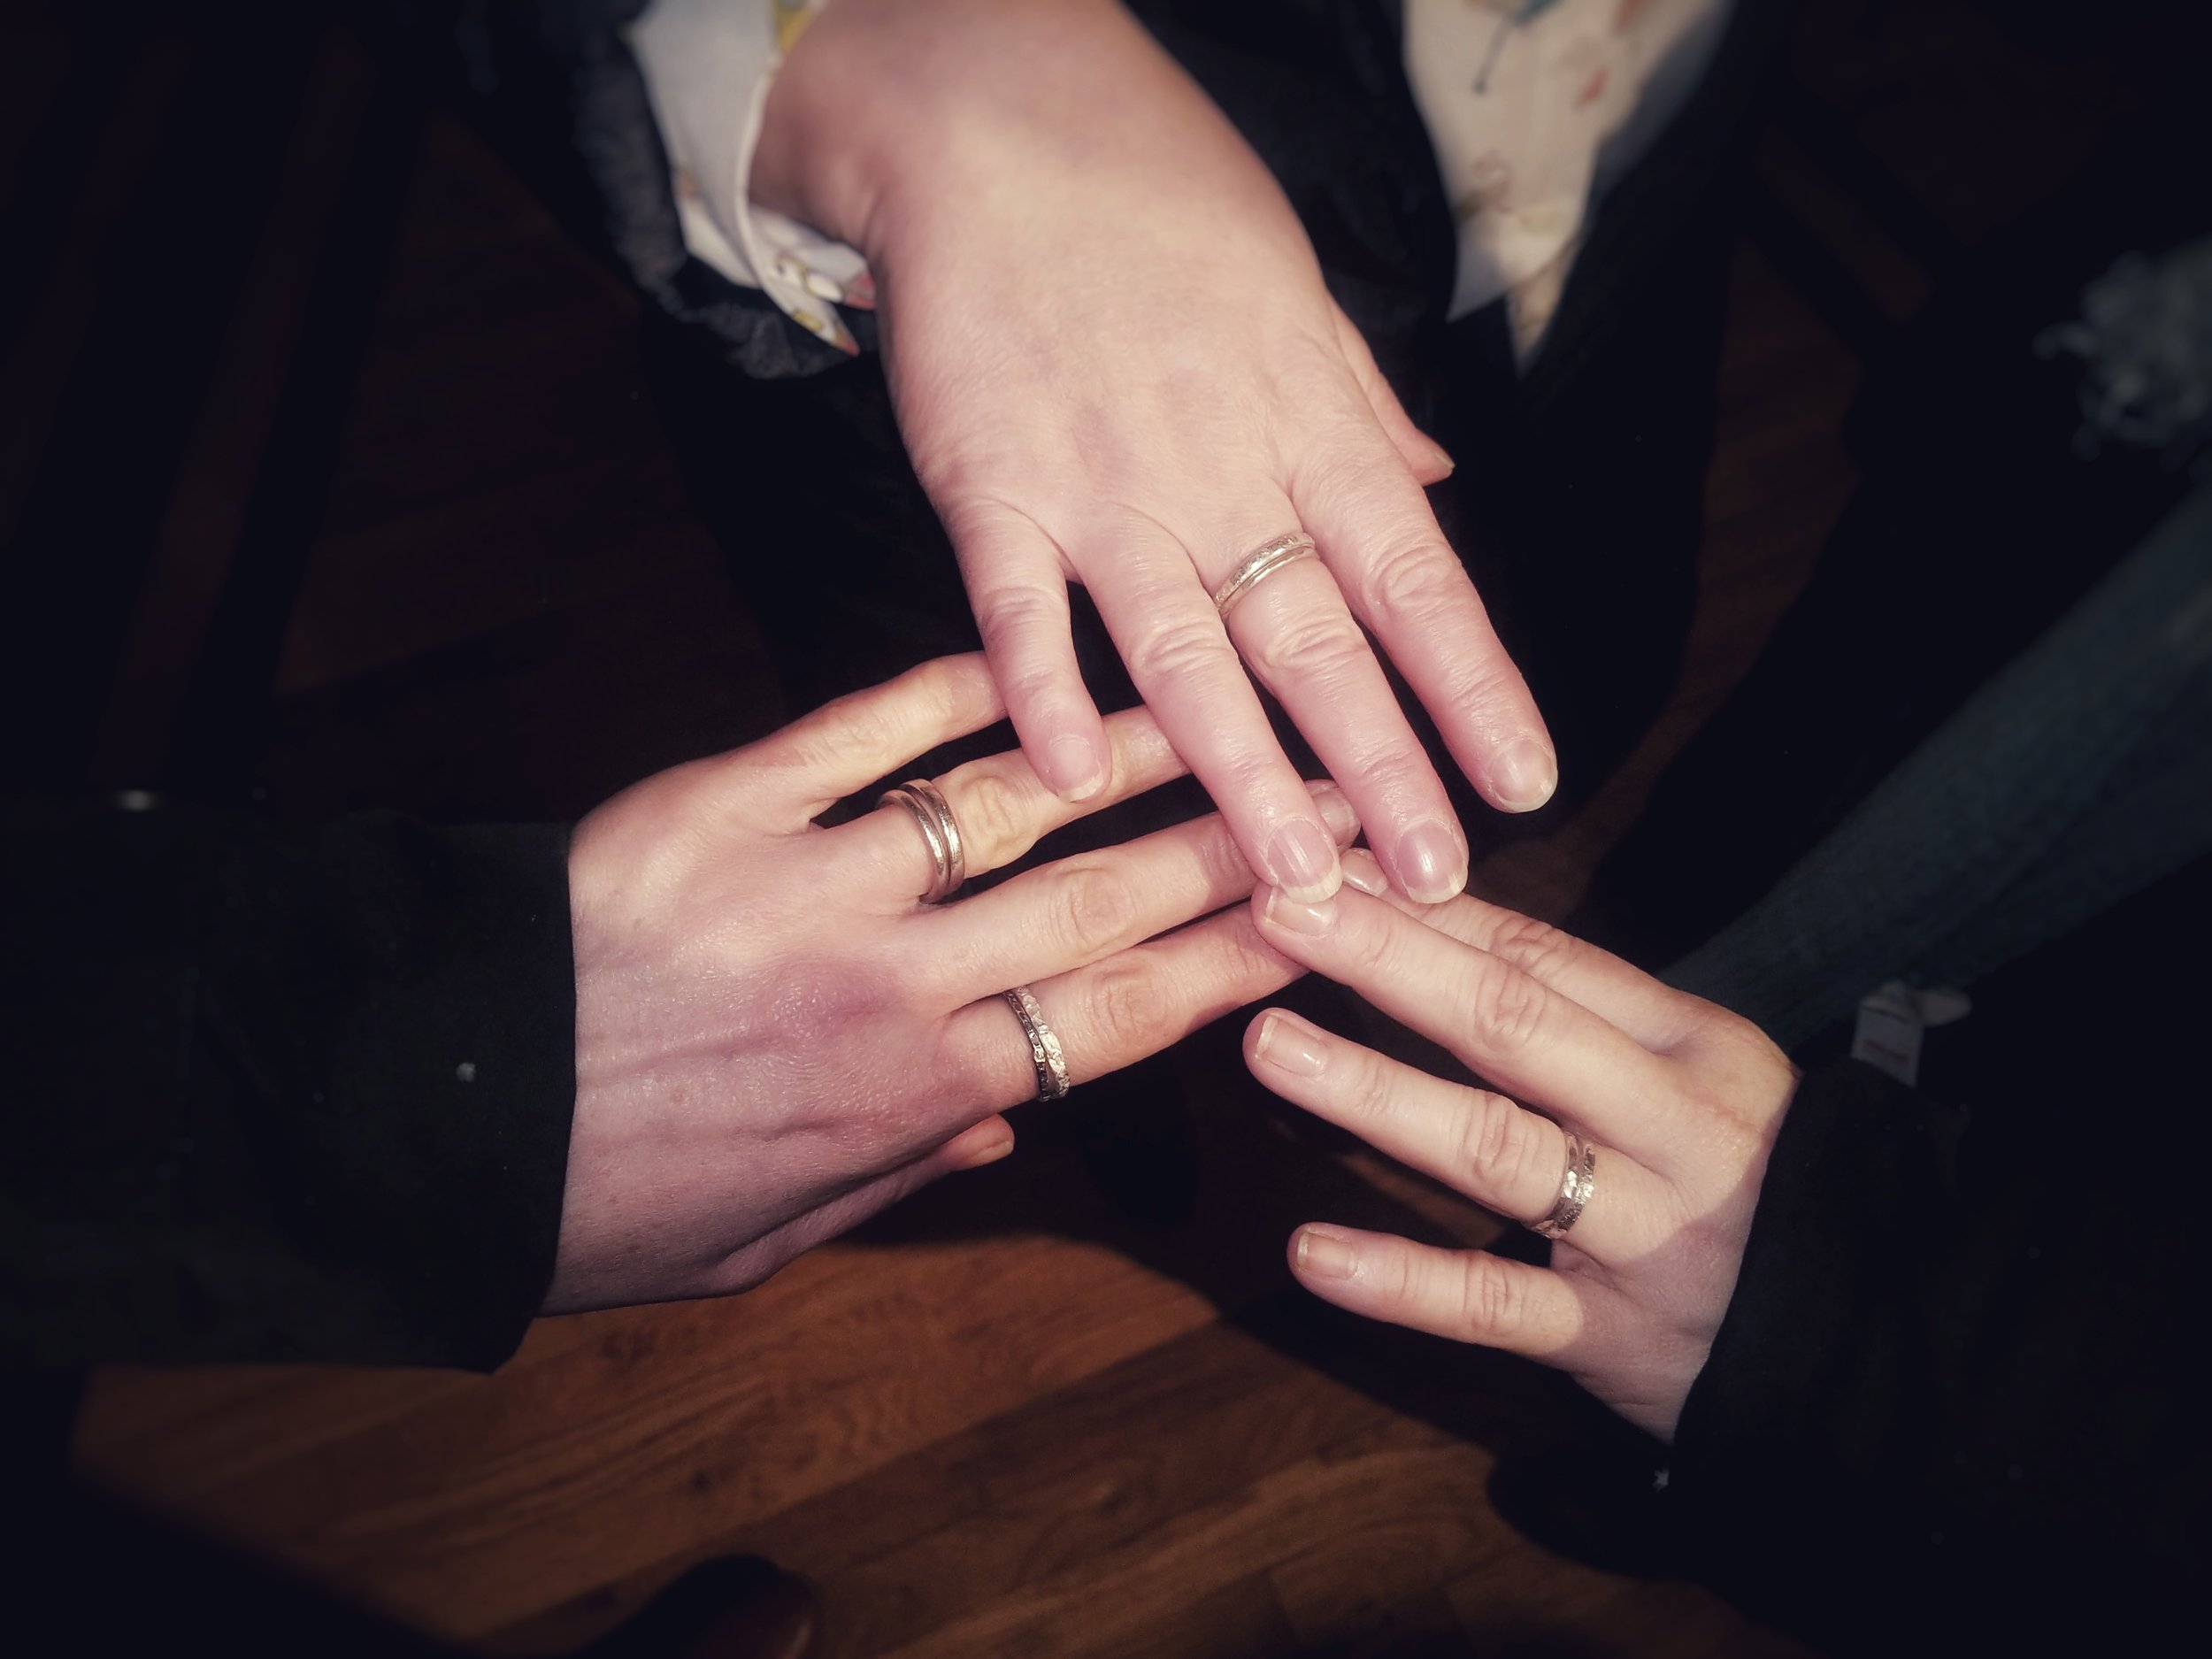 Participants wearing finished handmade silver rings